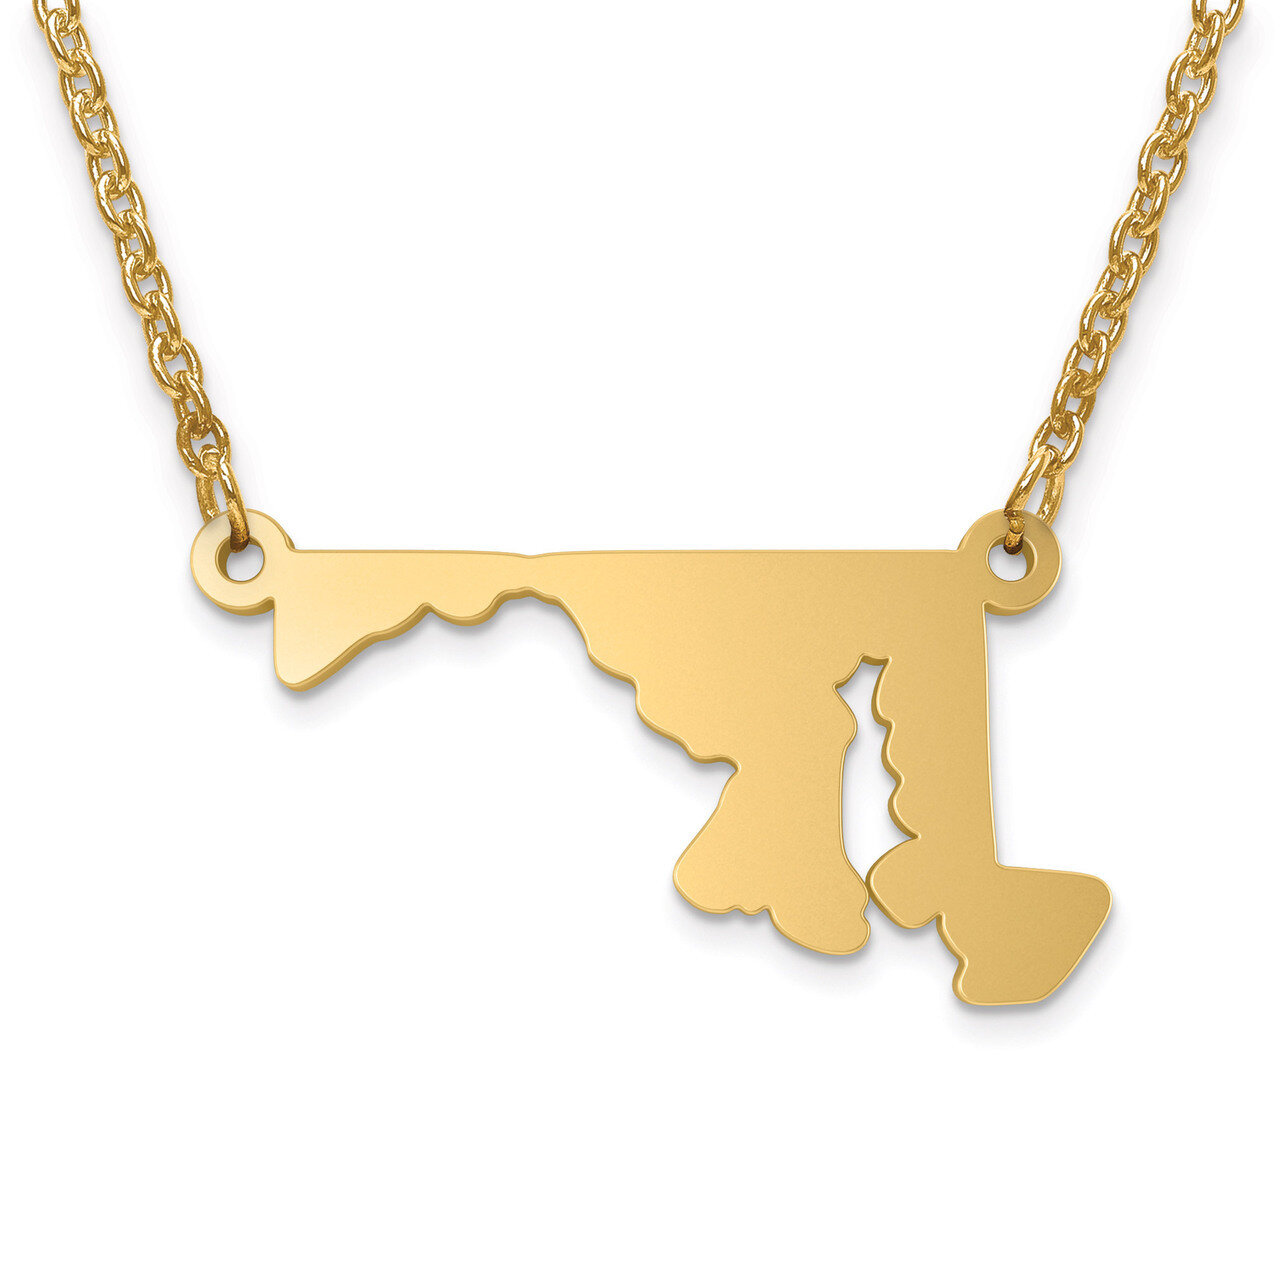 Maryland State Pendant with Chain Engravable Gold-plated on Sterling Silver